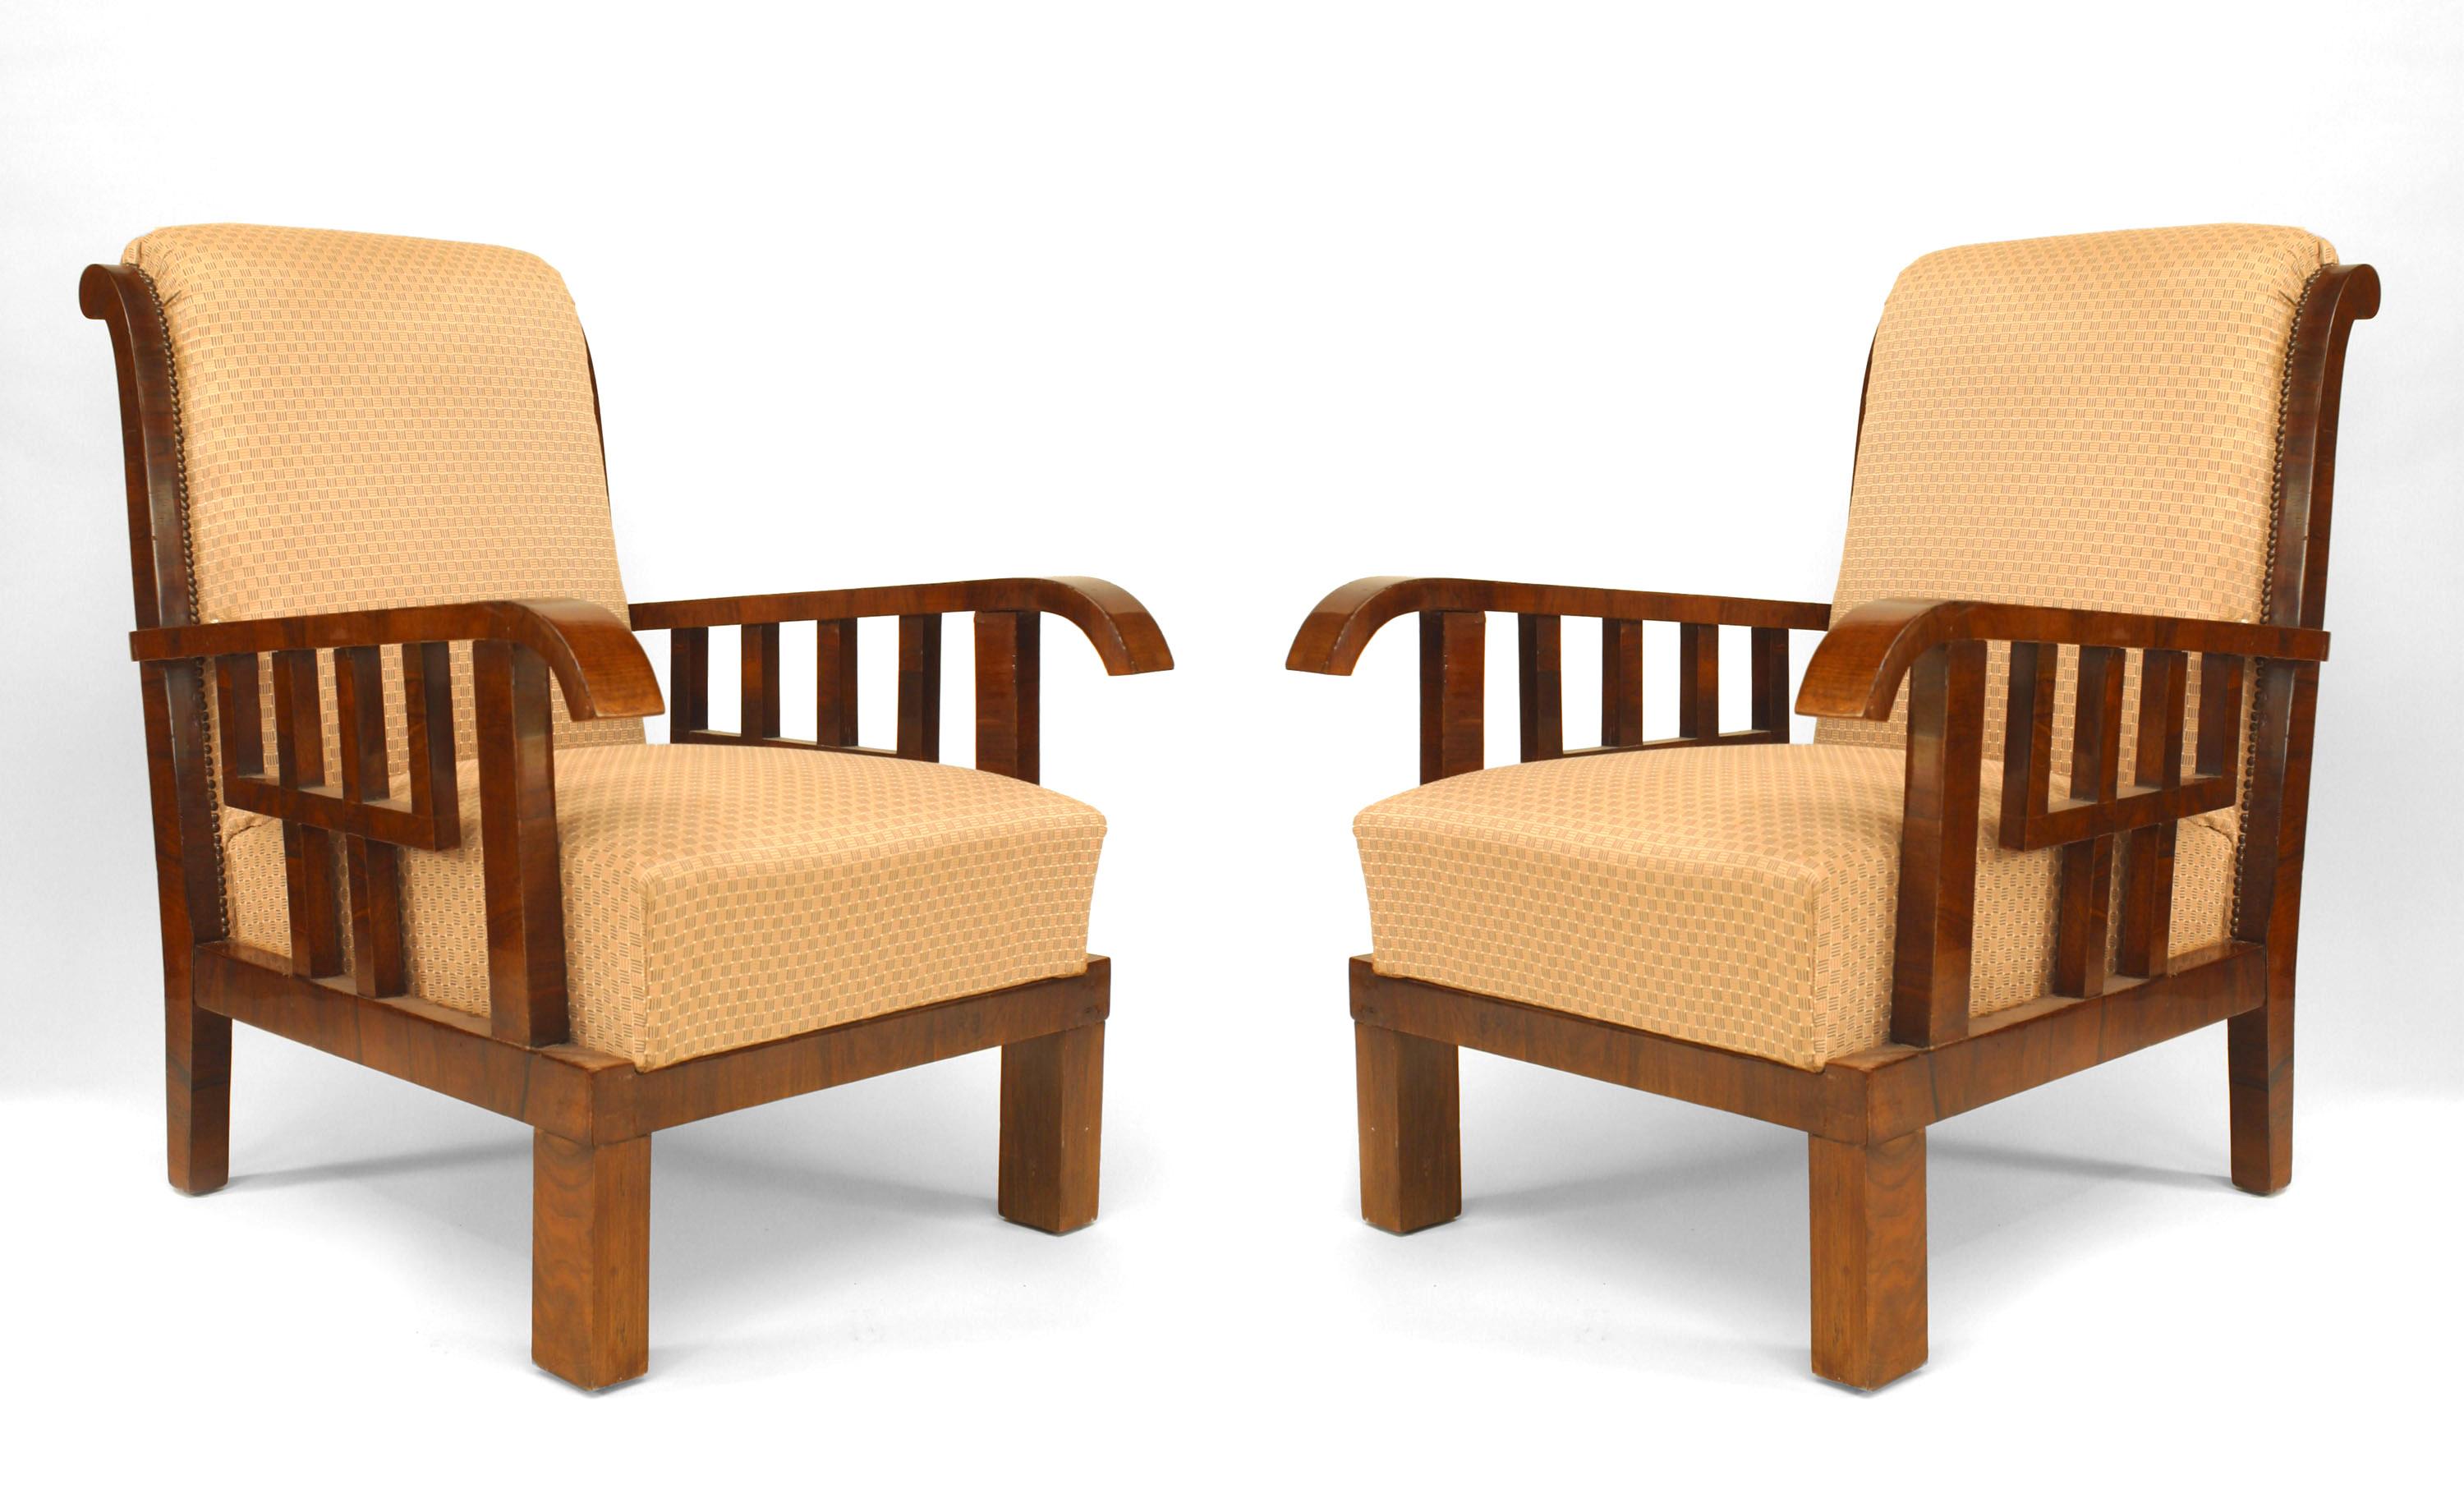 Pair of Art Deco (Hungarian) walnut Armchairs with geometric open design form under arms with upholstered seat and back supported on square legs (LAJOS KOZMA)
